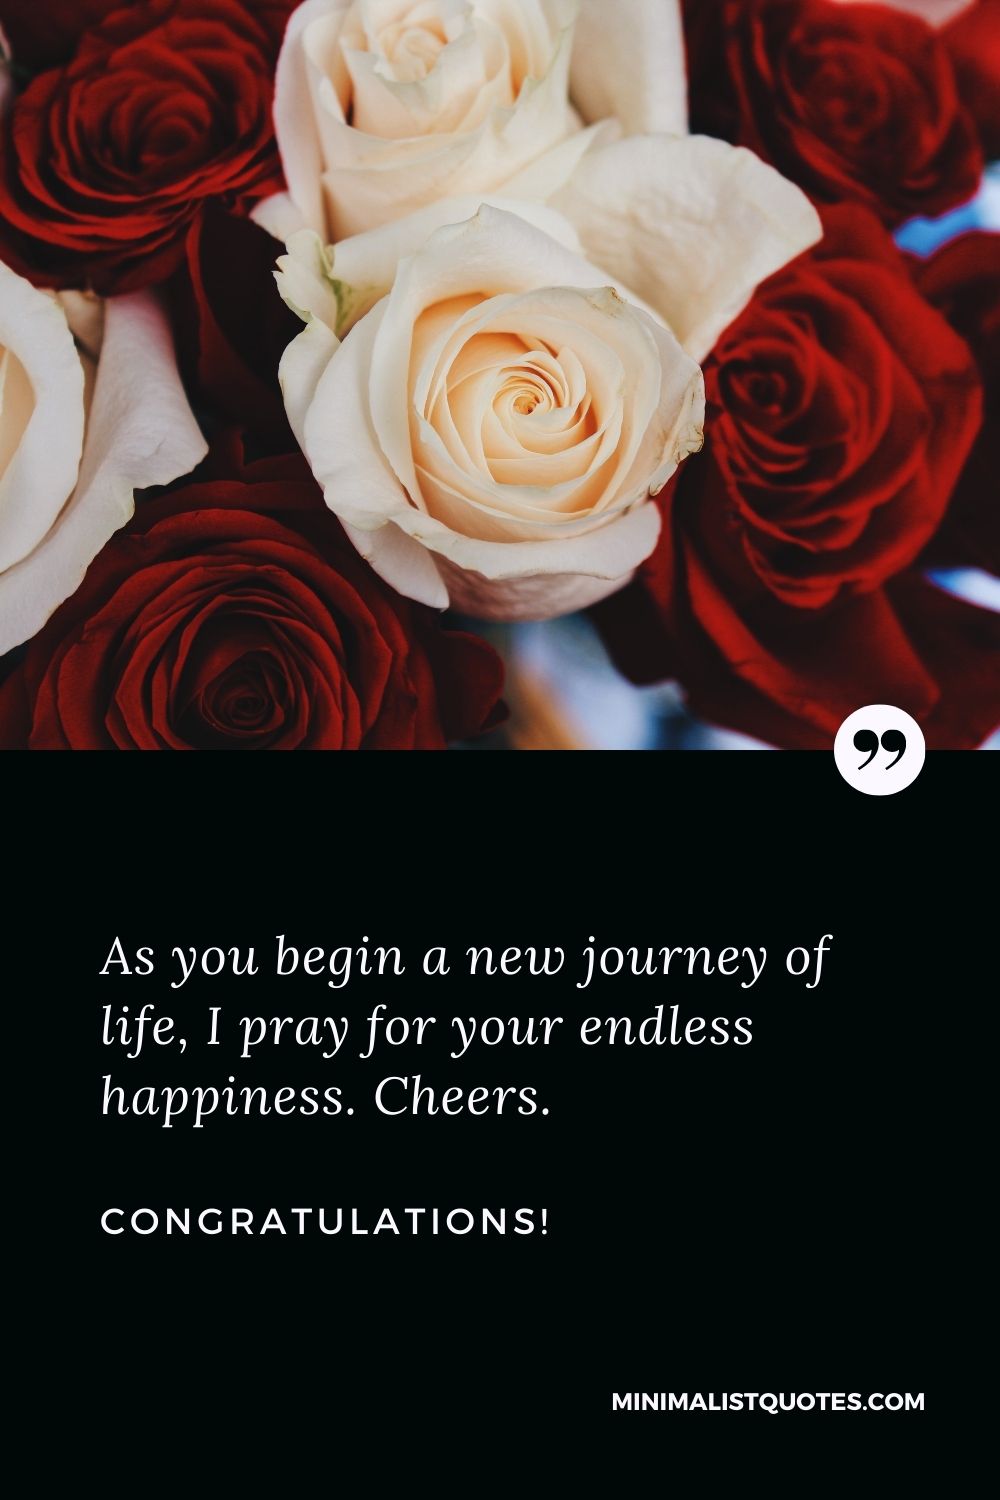 As you begin a new journey of life, I pray for your endless ...